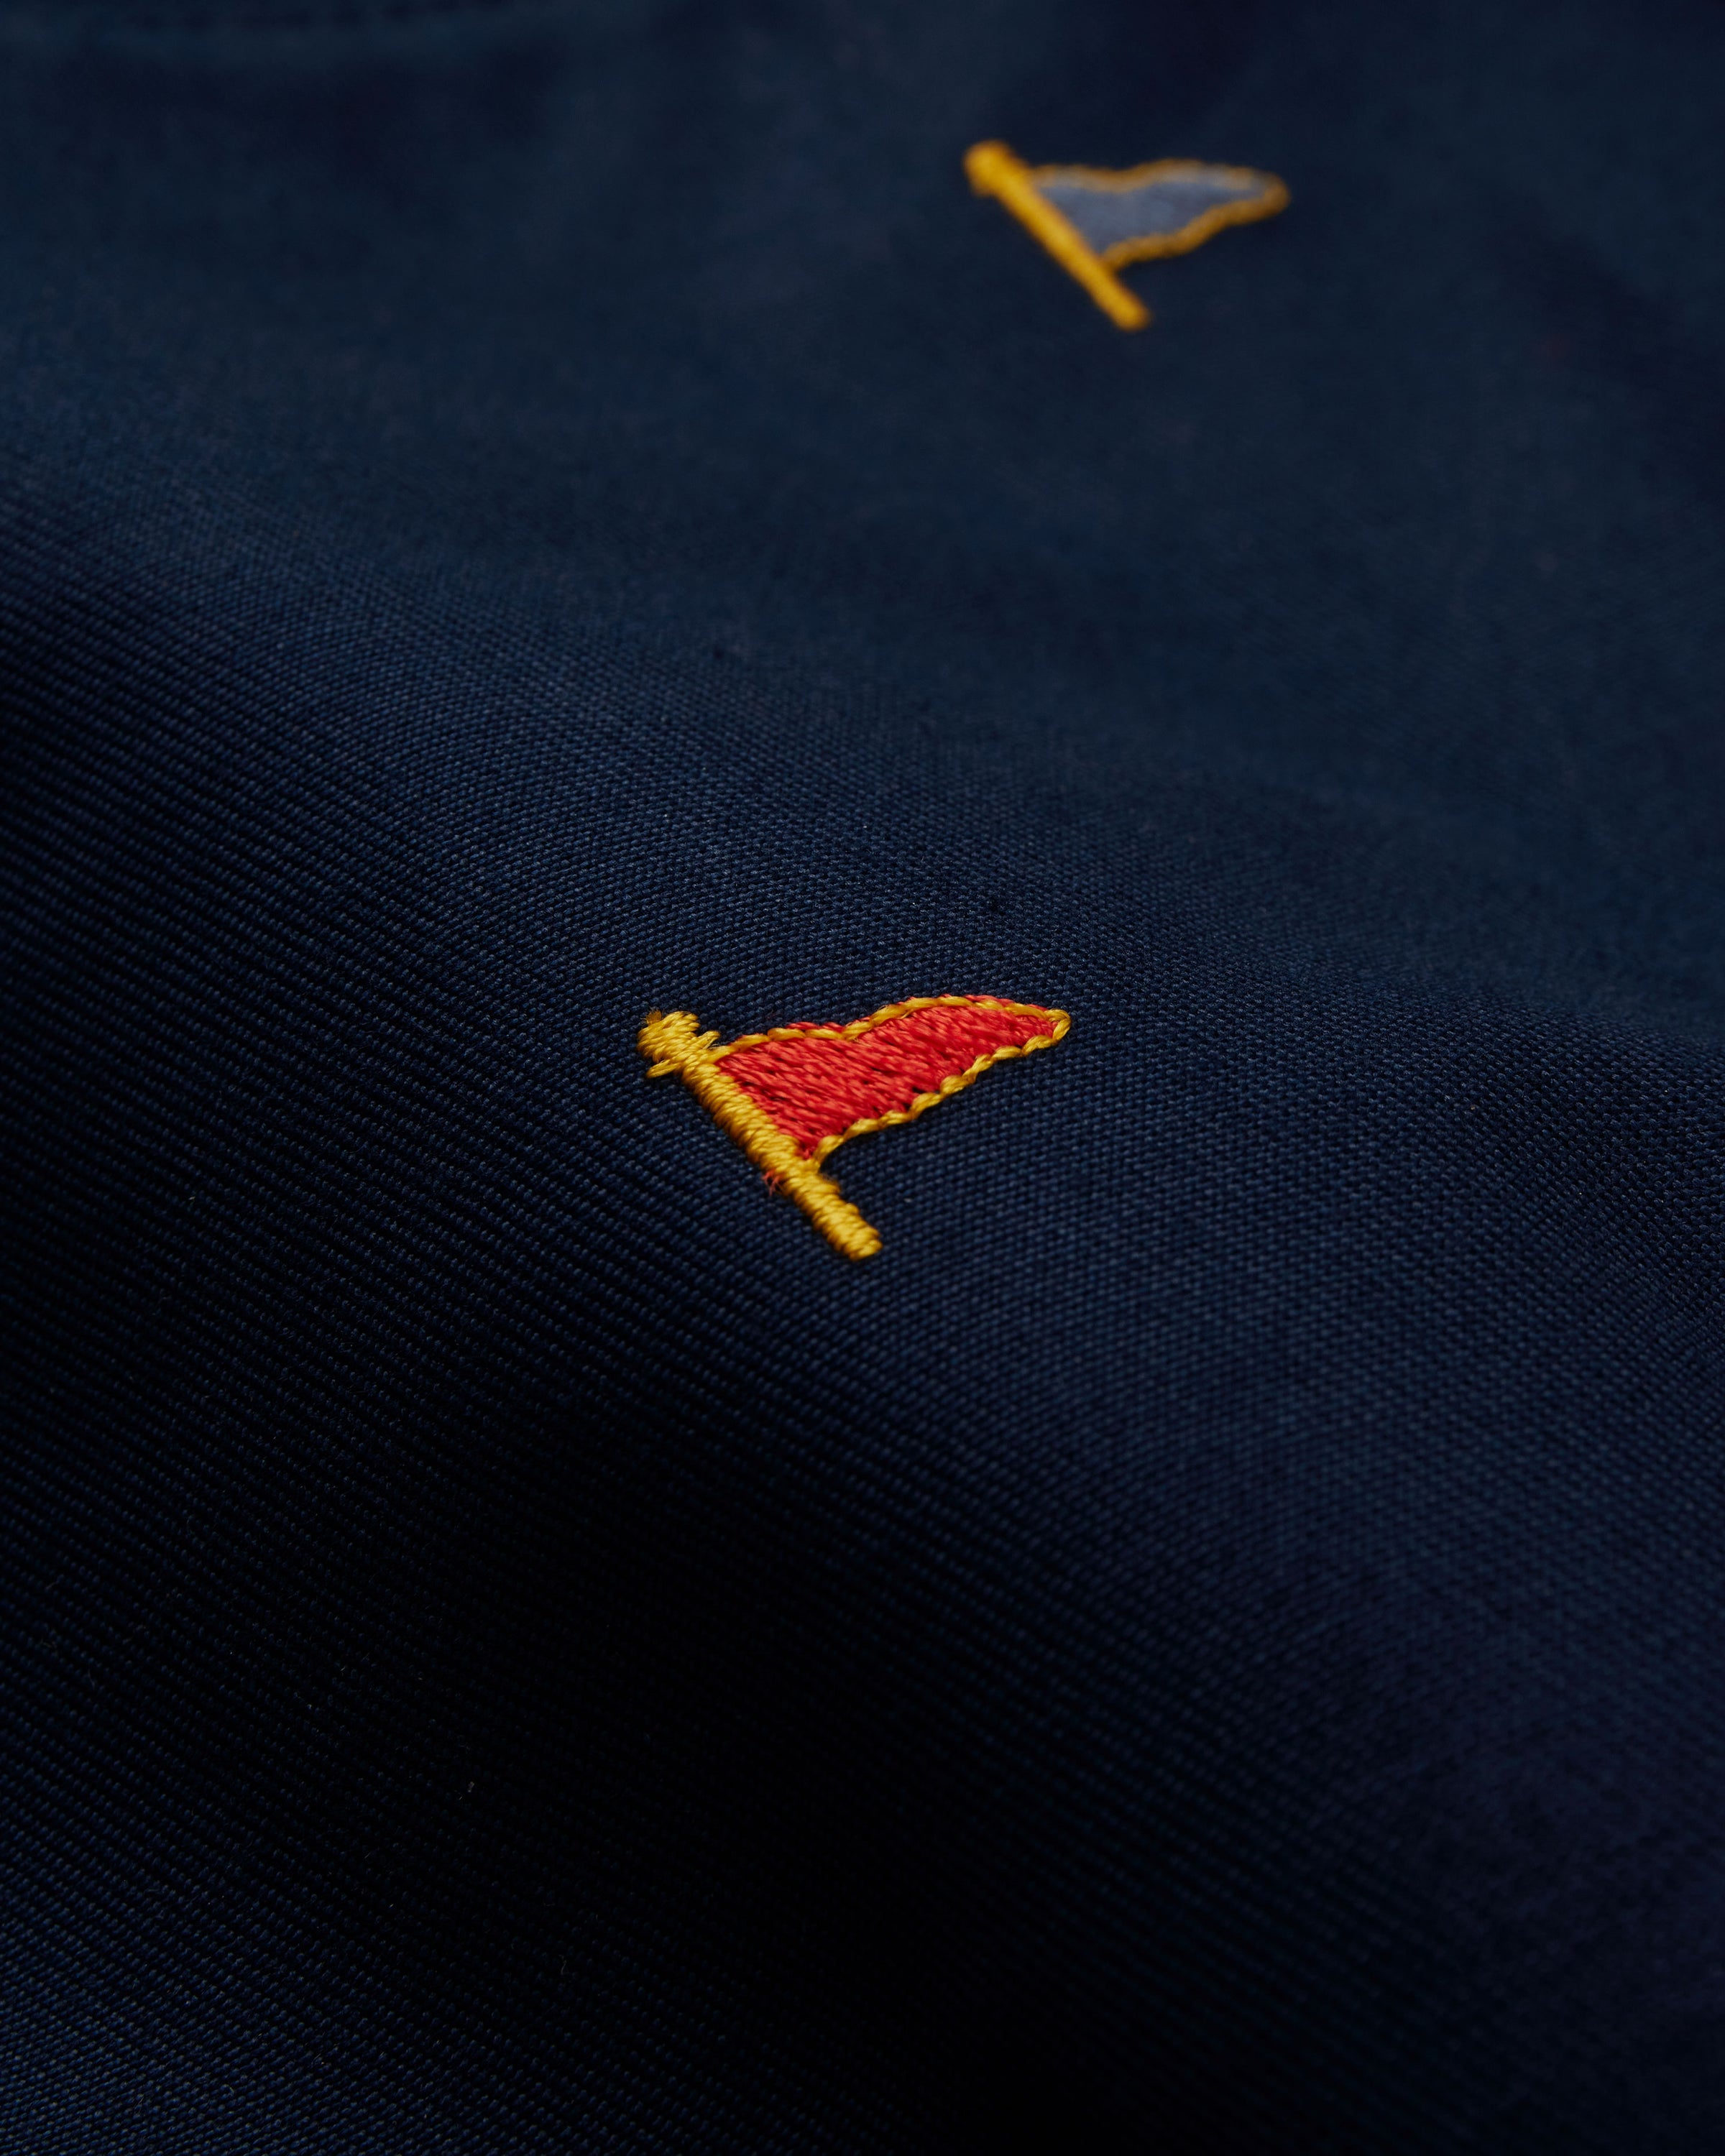 The Pennant Chino, Navy